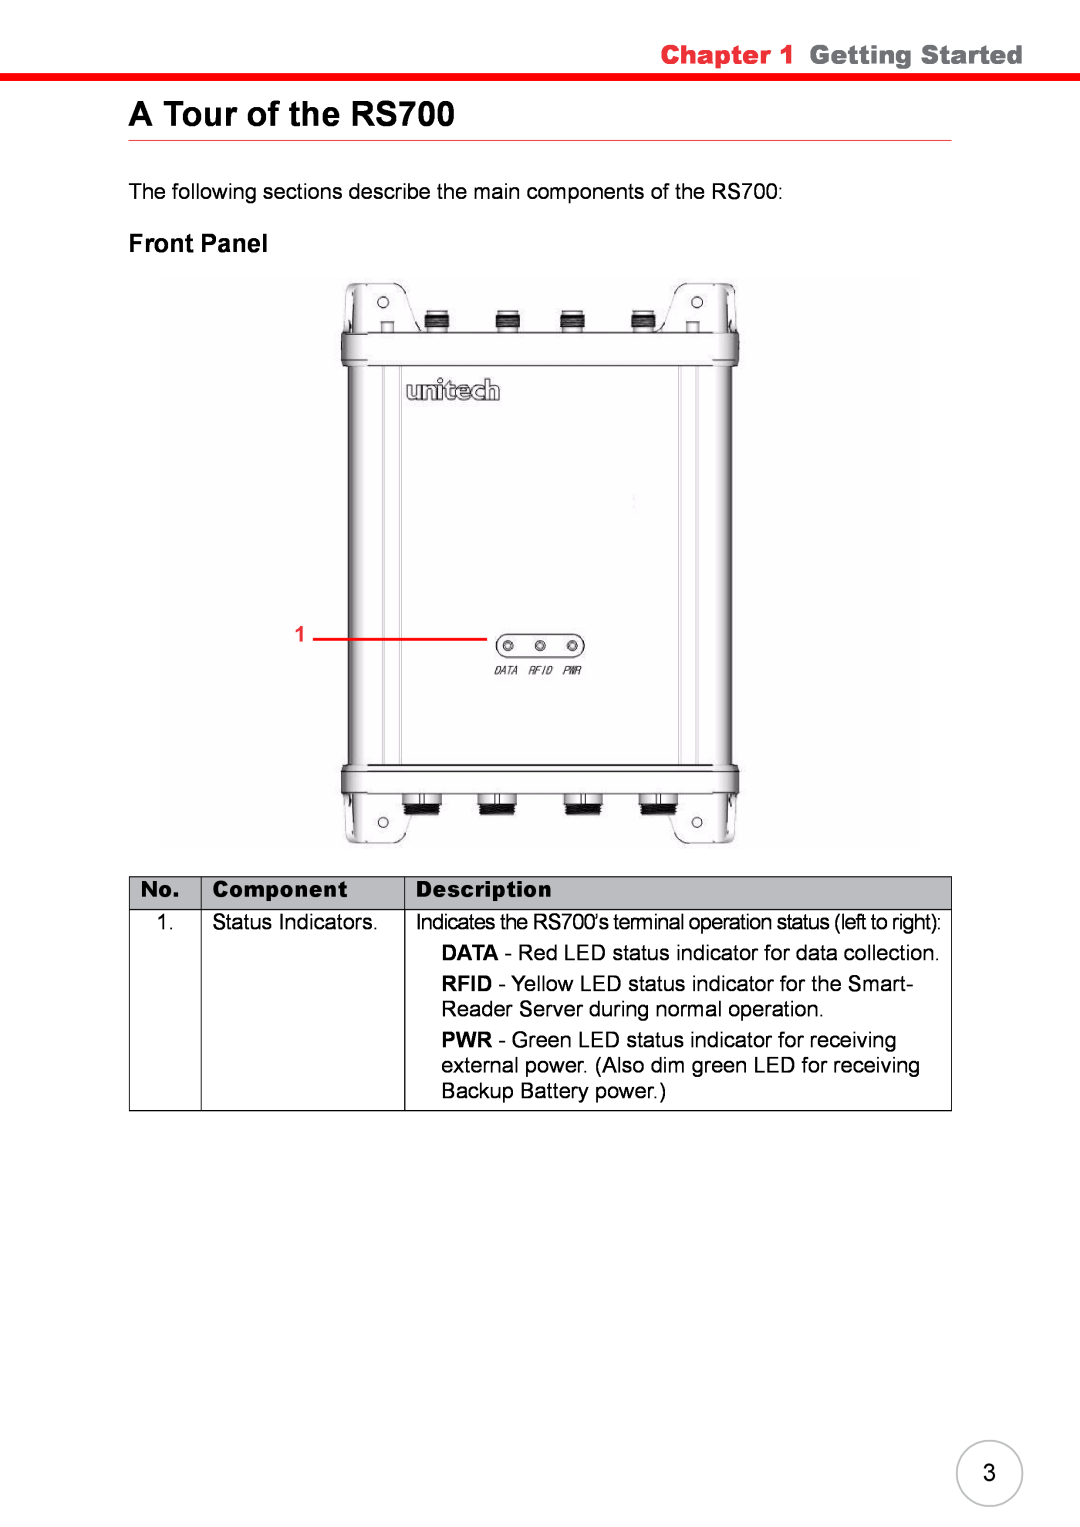 Unitech user manual A Tour of the RS700, Front Panel, Component, Description, Getting Started 